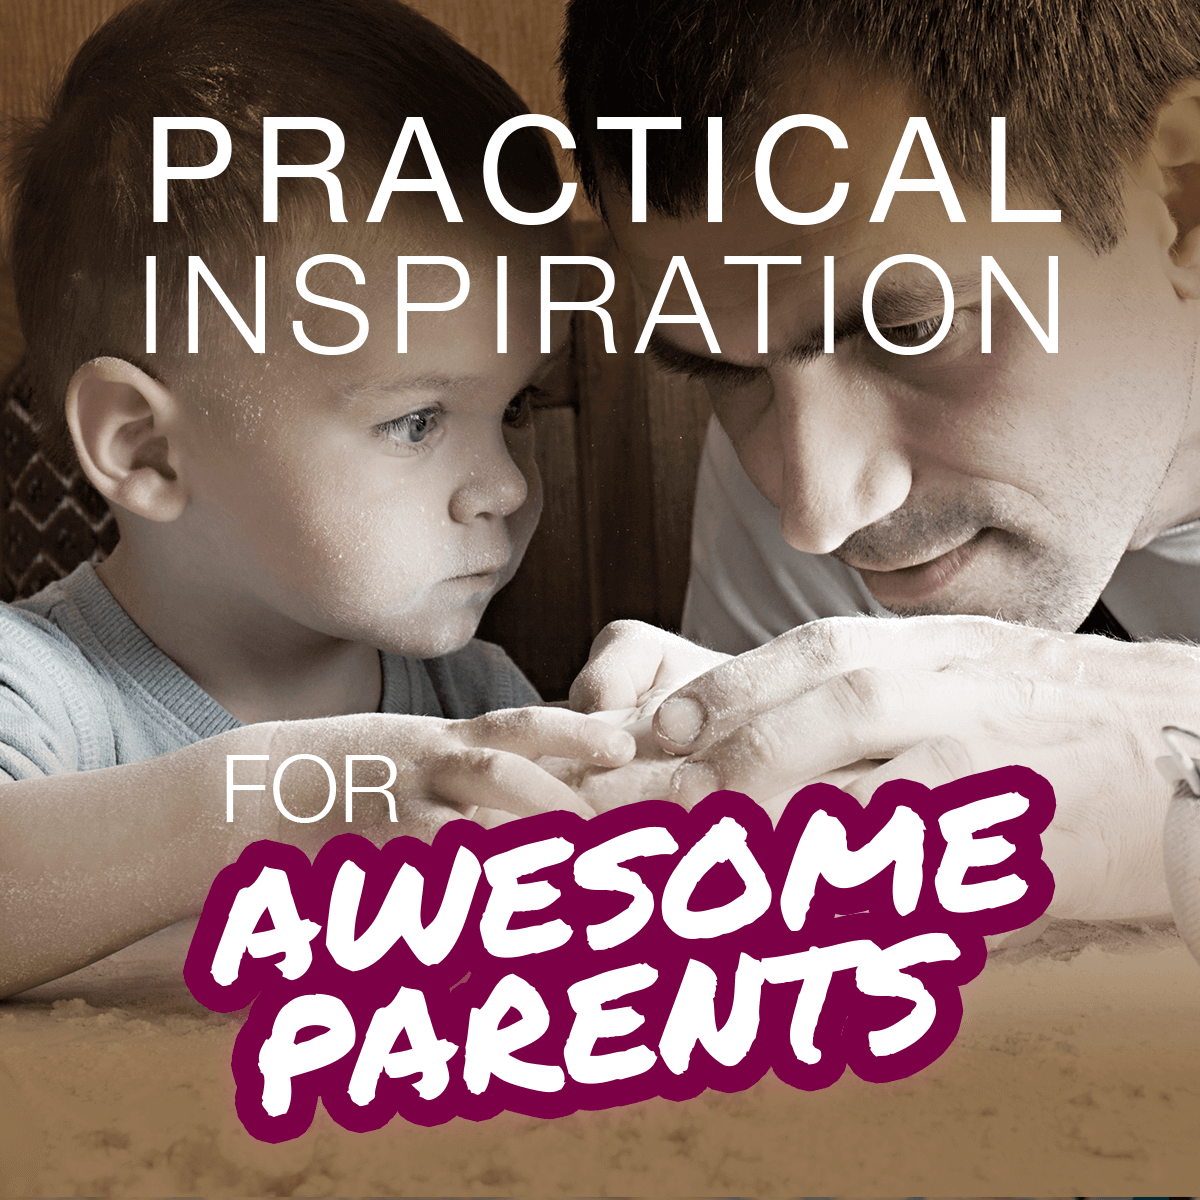 How To Become an Awesome Parent